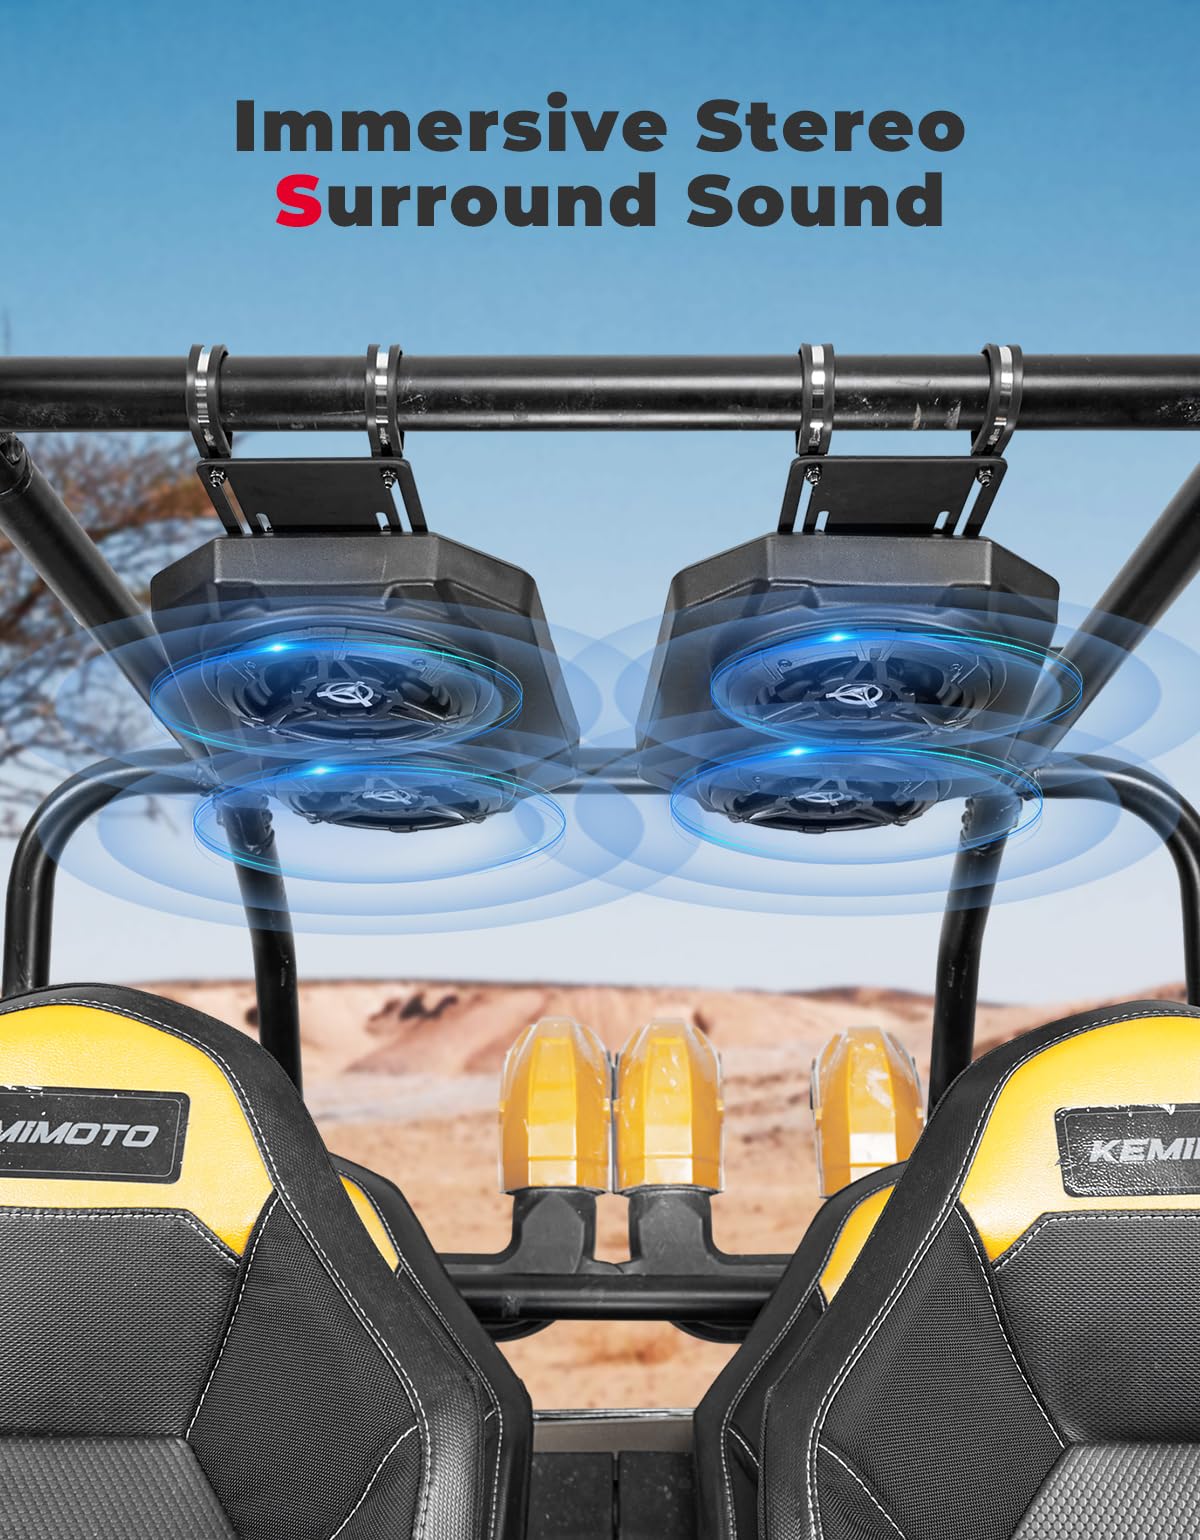 KEMIMOTO UTV Sound System 6.5 Inch Speakers UTV Sound Bar Overhead Stereo Bluetooth for UTVs Fits 1.625-1.9in Roll Cages Compatible with Can-Am X3 & X3 Max, Polaris RZR XP 1000, Uforce